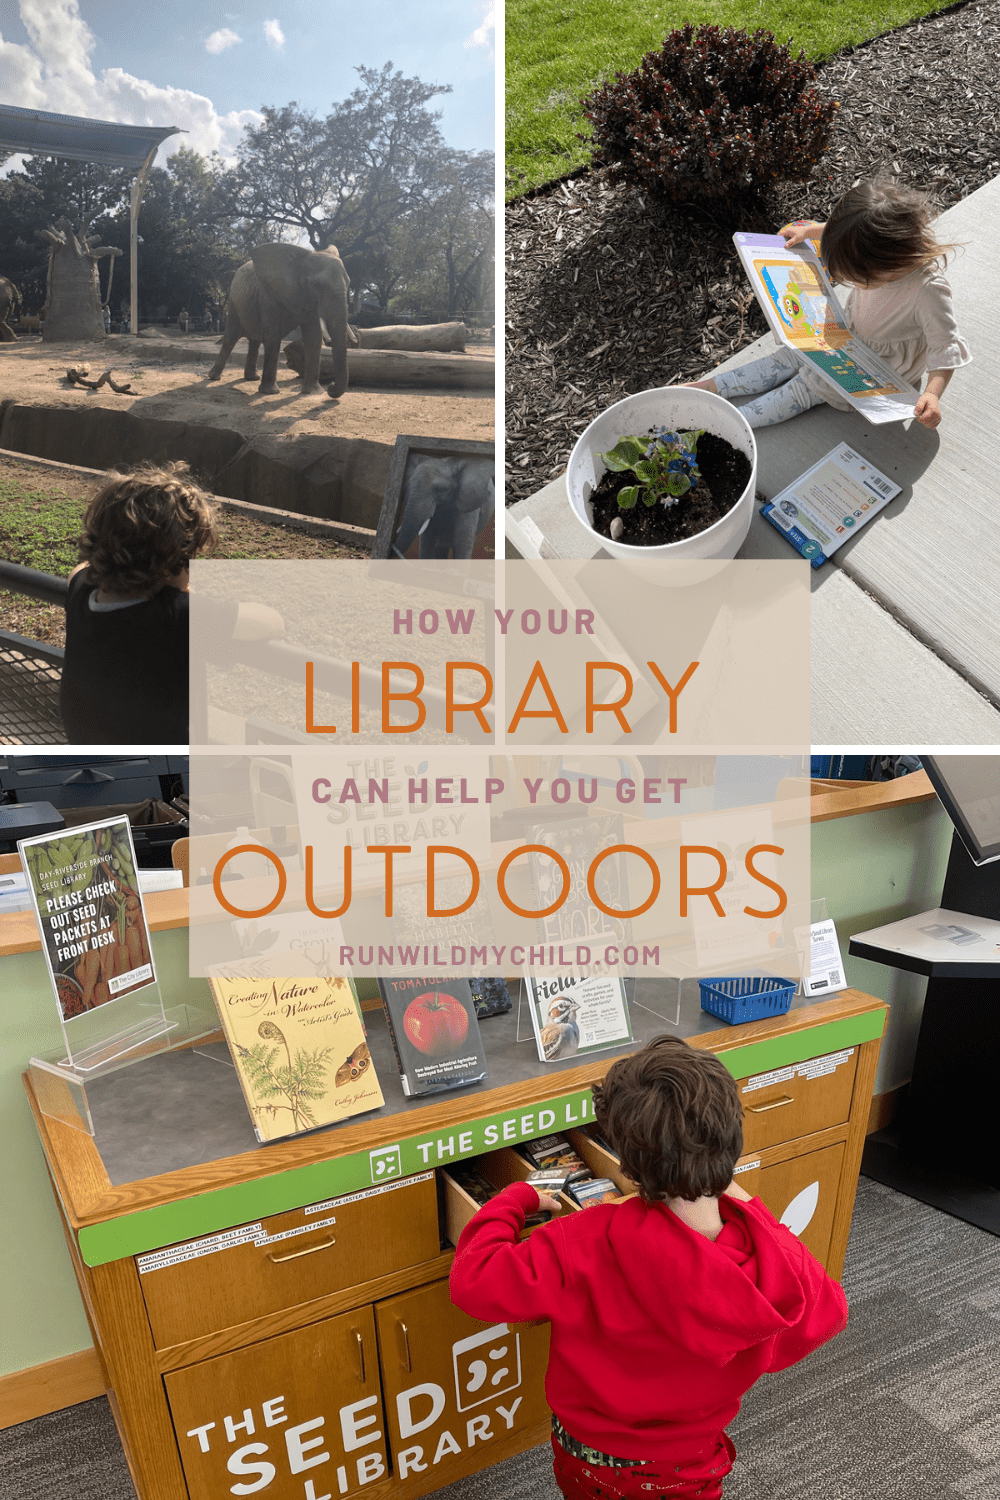 How hour library can help you get outdoors over three images of kids